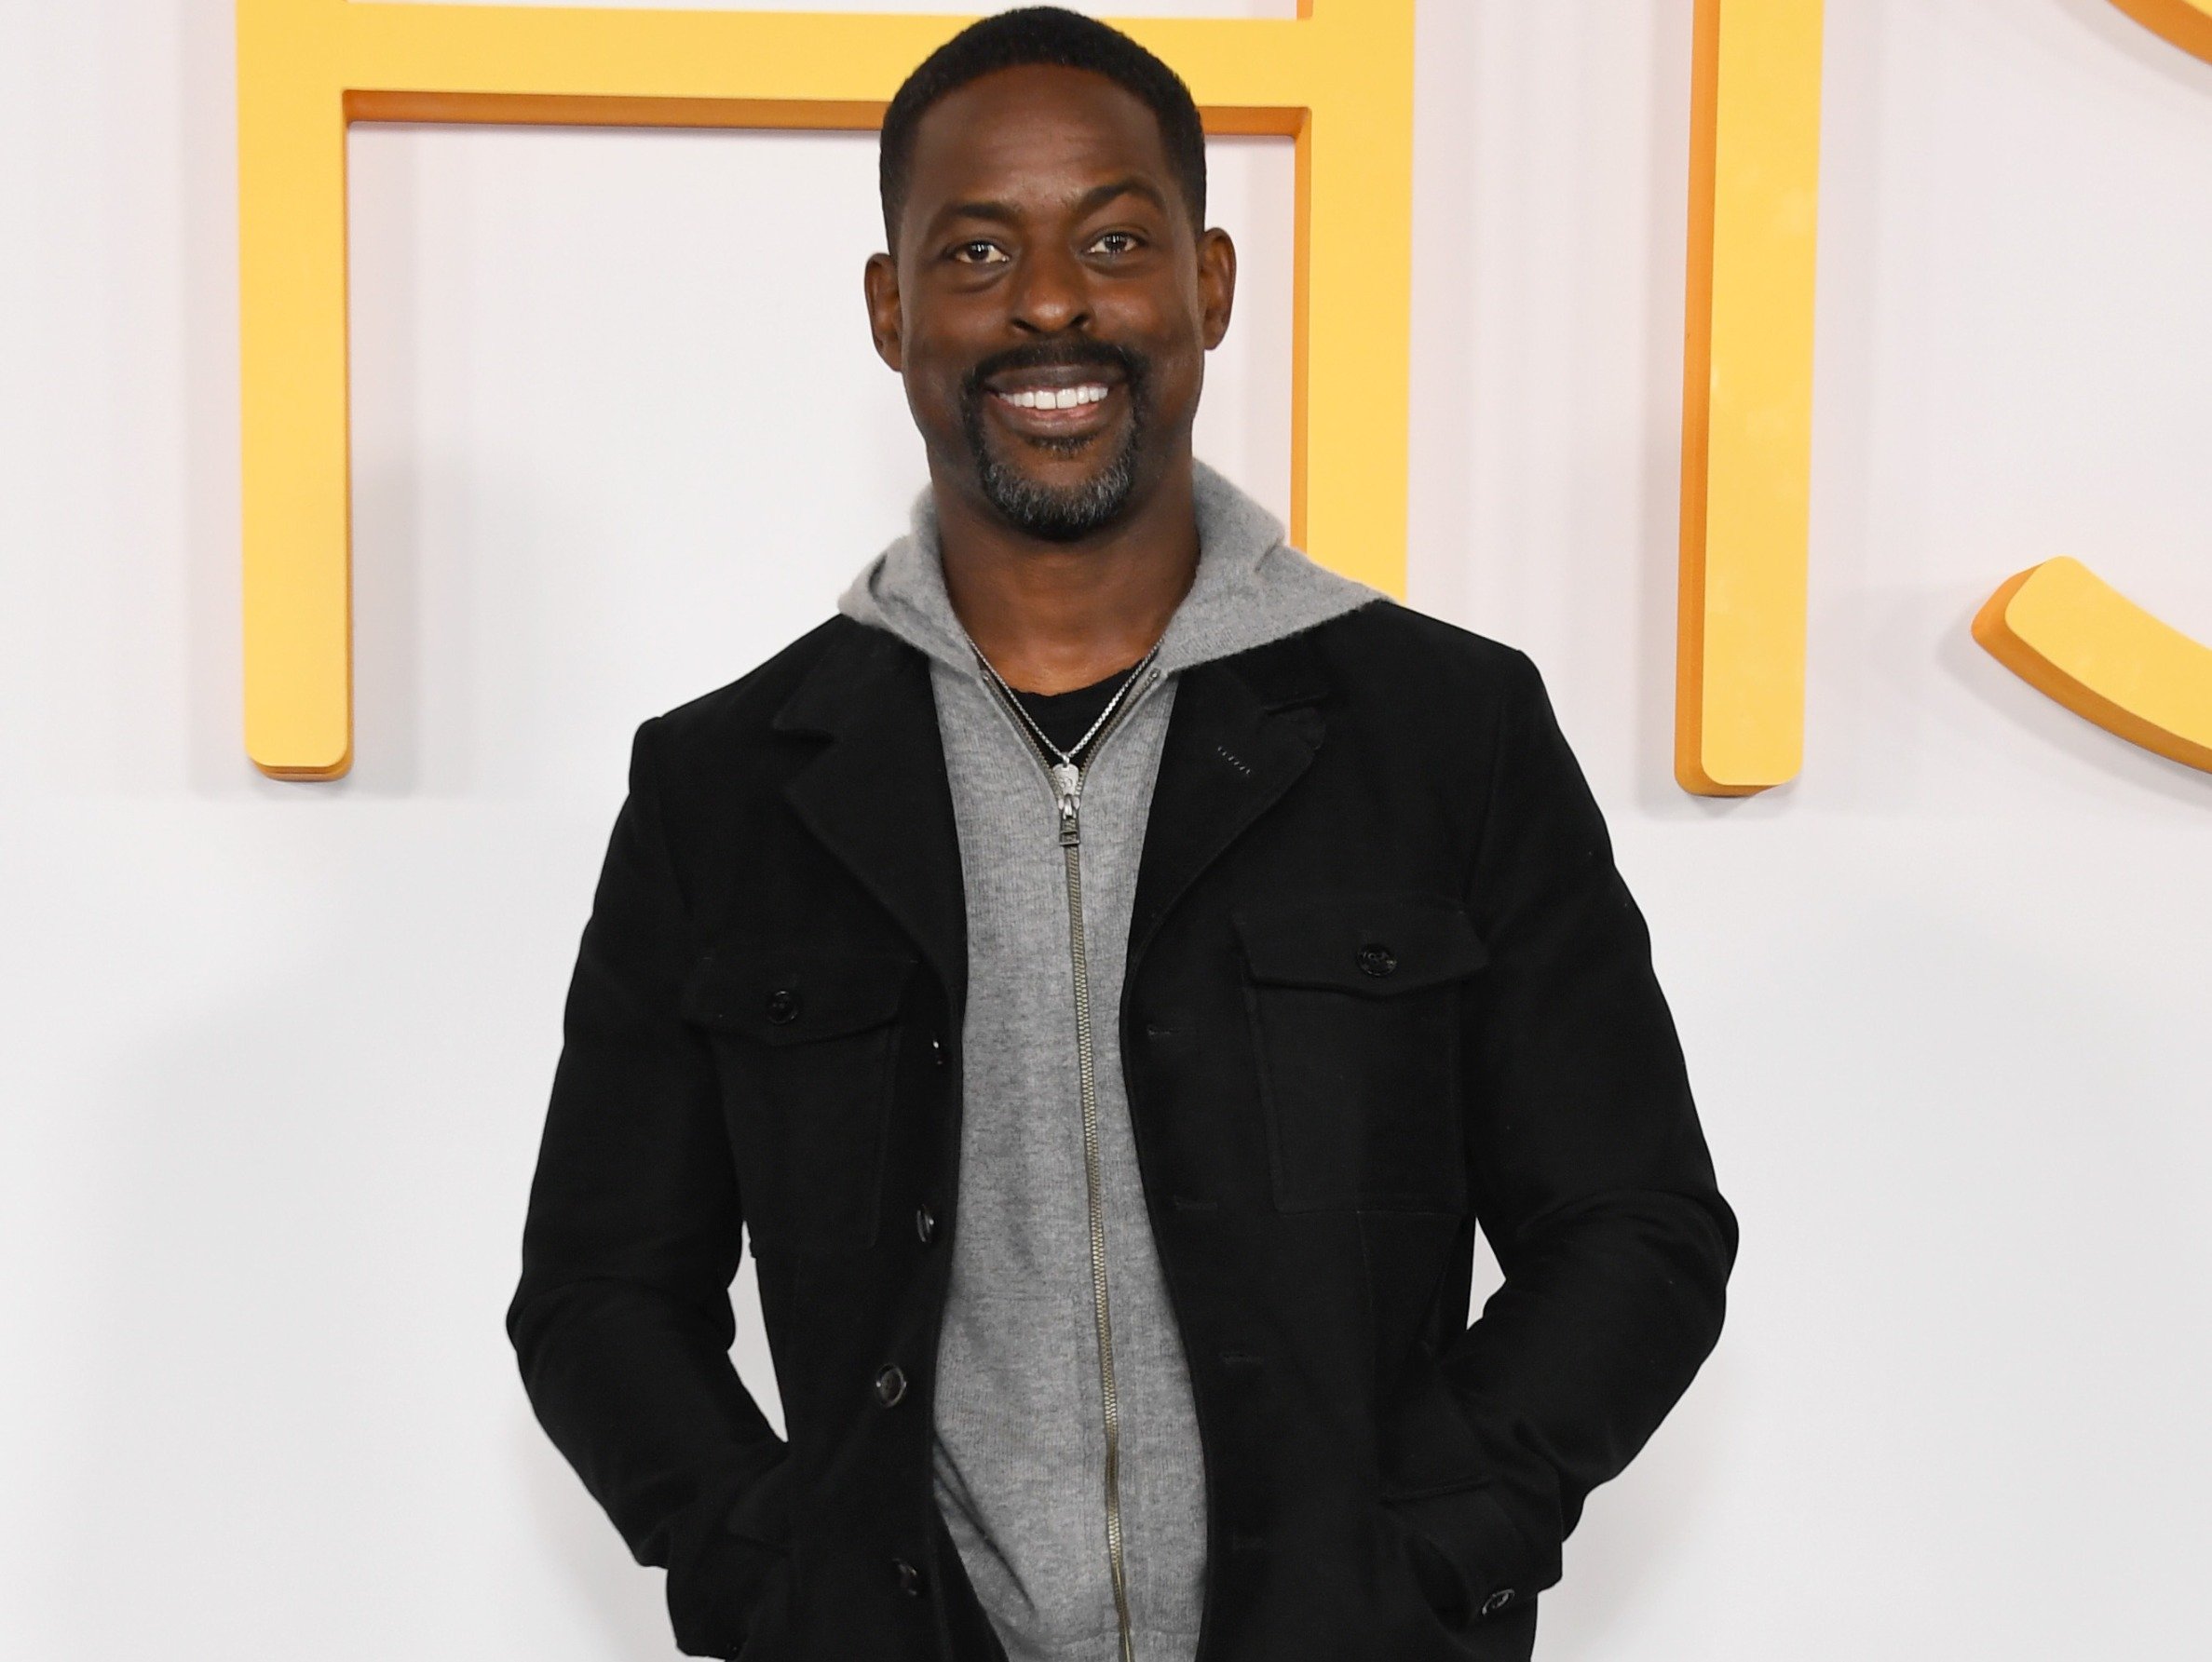 'This Is Us' star Sterling K. Brown, who appears as Randall Pearson for the last time in the series finale. He's standing in front of a white wall with the yellow 'This Is Us' logo on it, and he's wearing a gray sweatshirt under a black jacket.